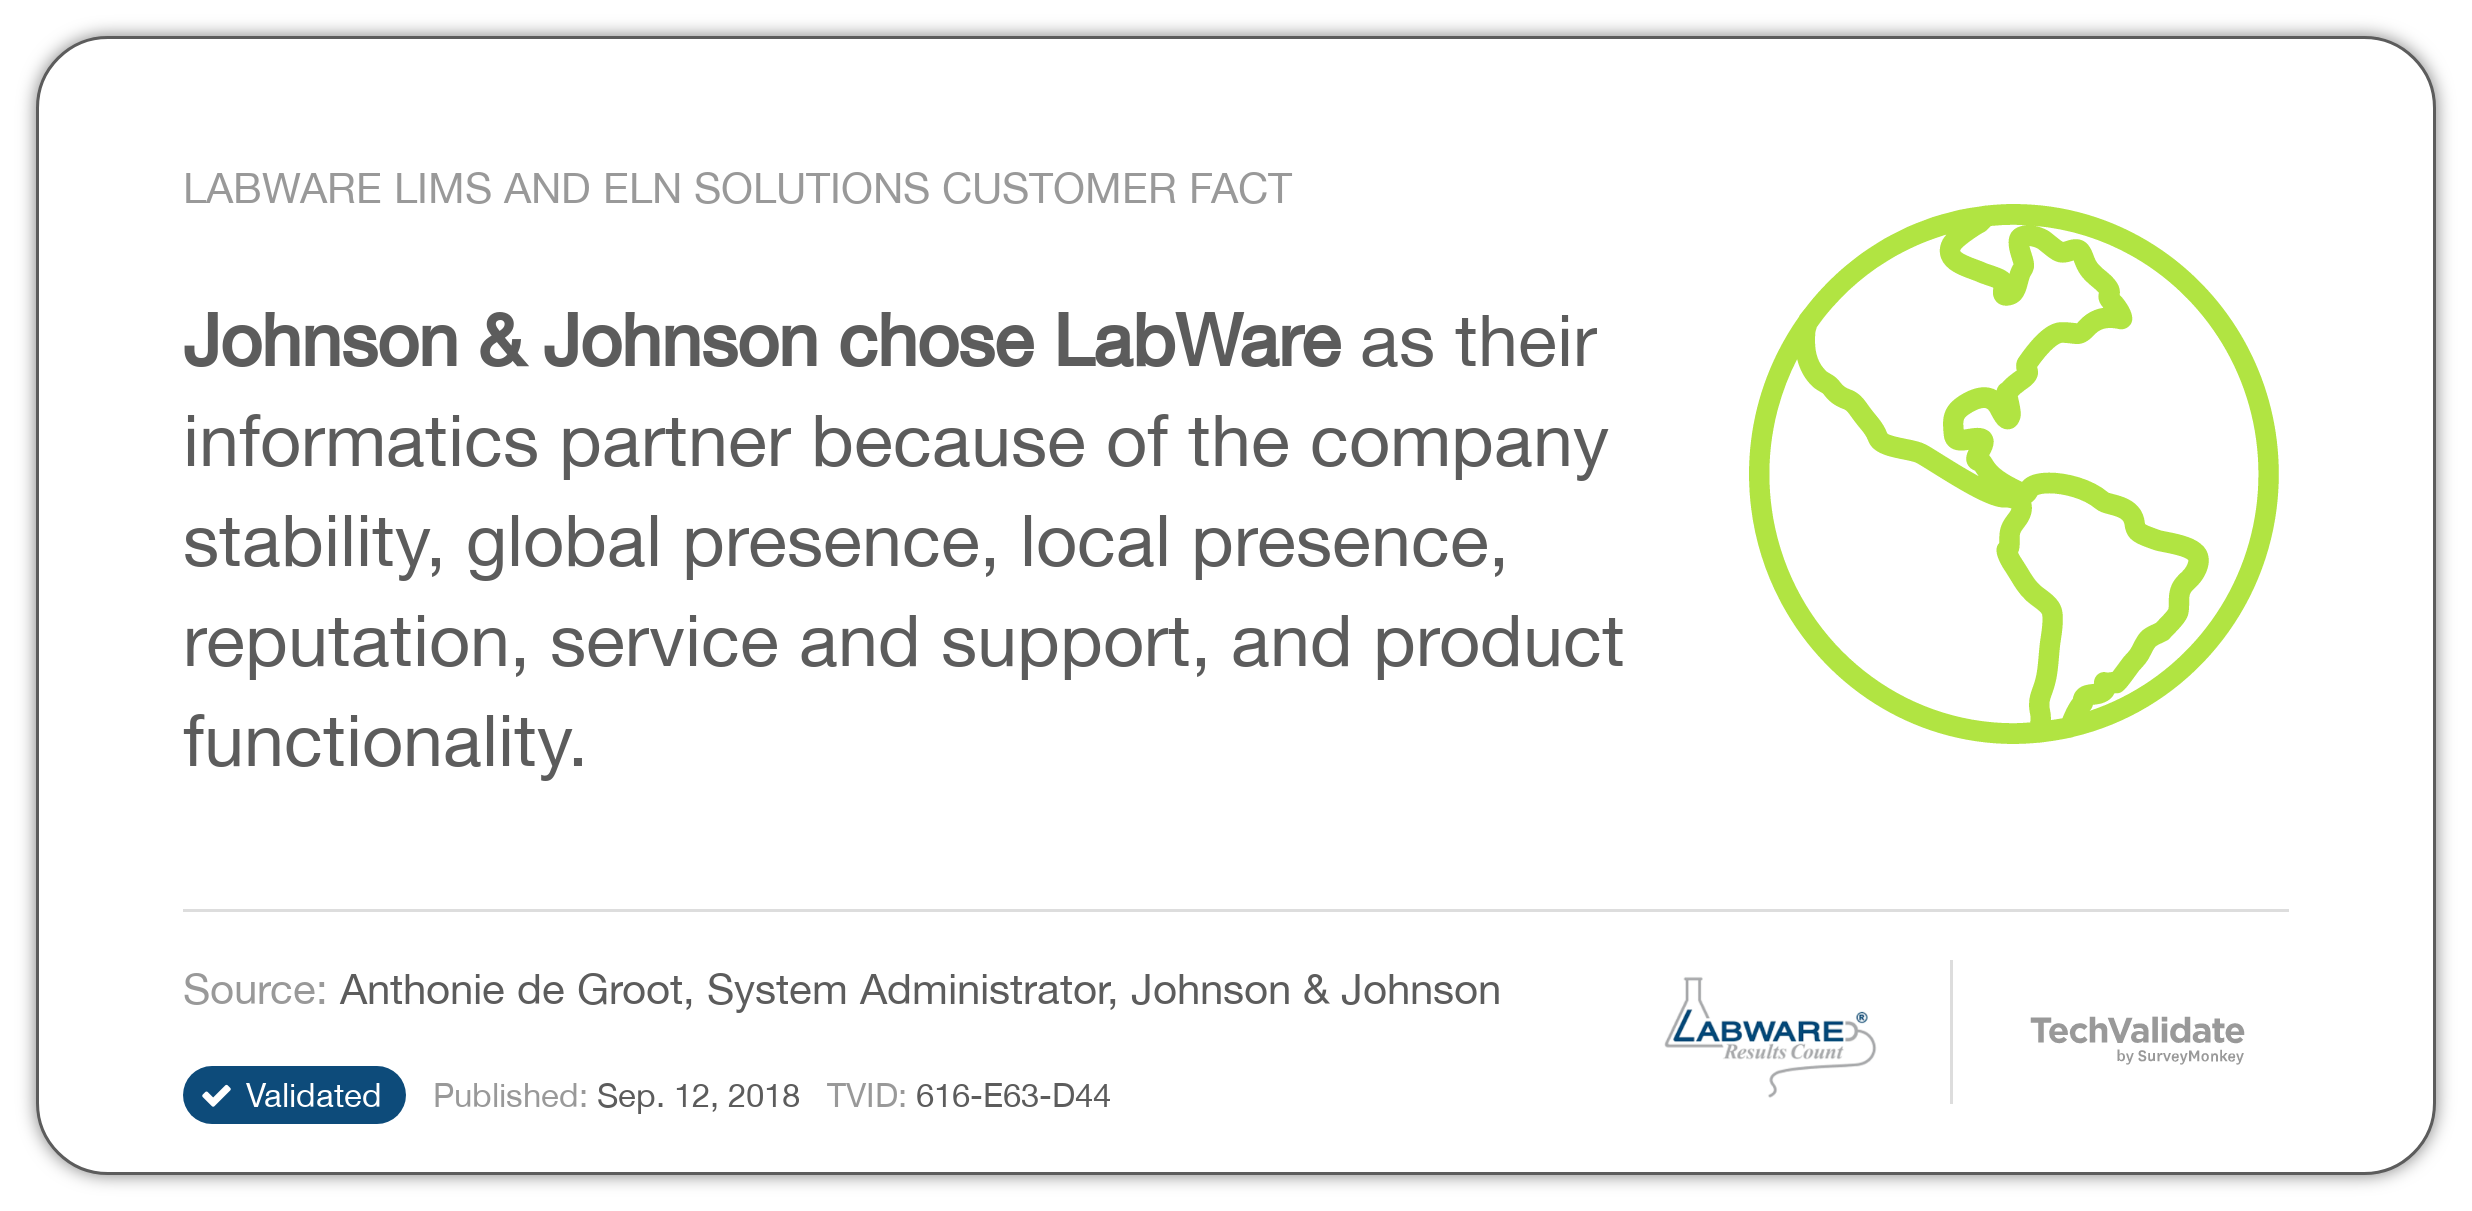 LabWare LIMS and ELN Solutions Customer Fact